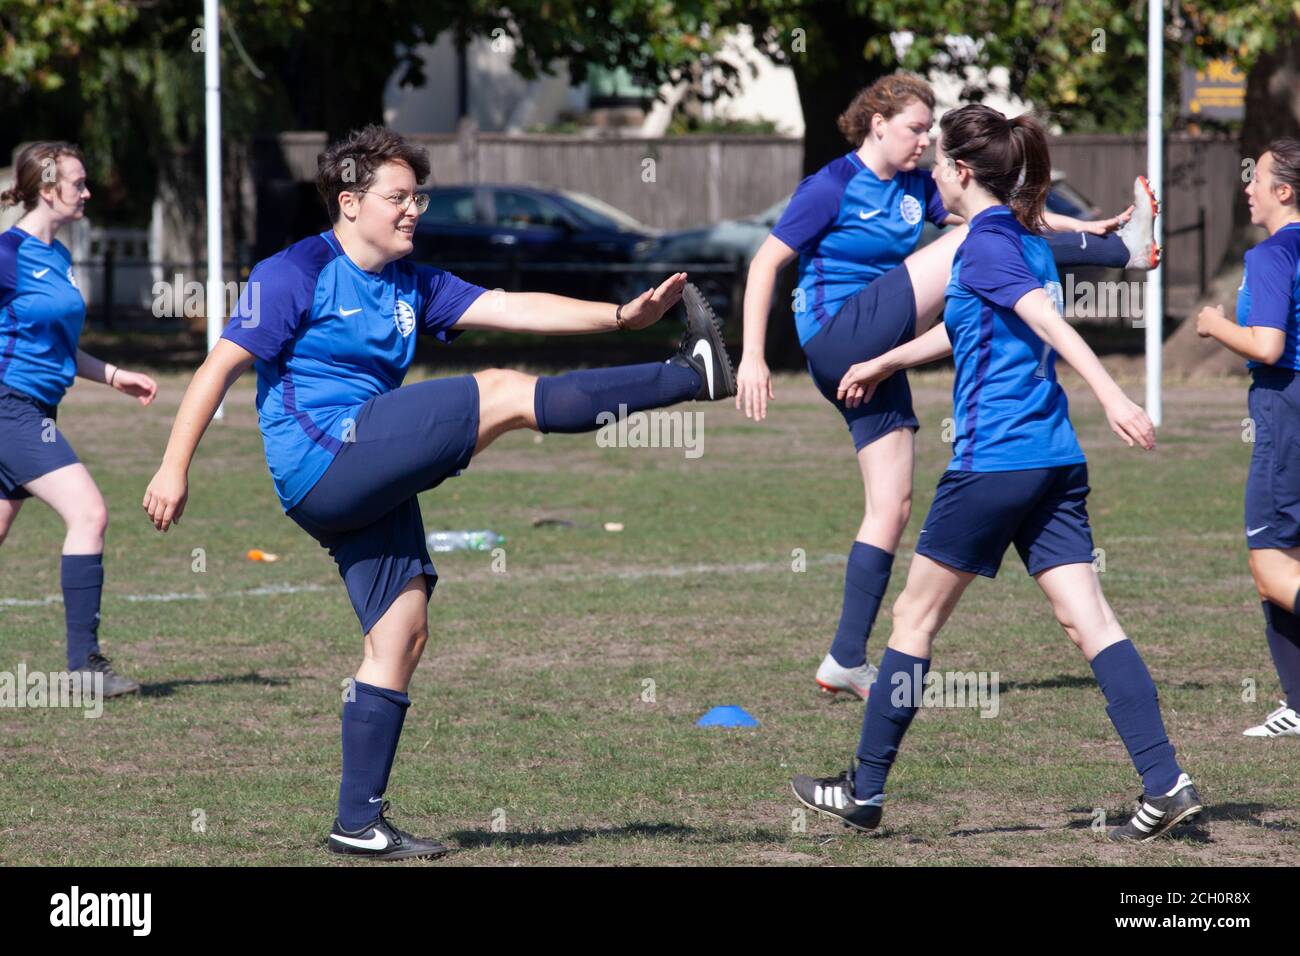 London, UK. 13 Sept 2020: A women's football team warm up in sunny weather on Clapham Common, London. New laws effective from tomorrow will ban groups of over 6 people meeting but organised sports are exempt from the rule. Anna Watson/Alamy Live News Stock Photo